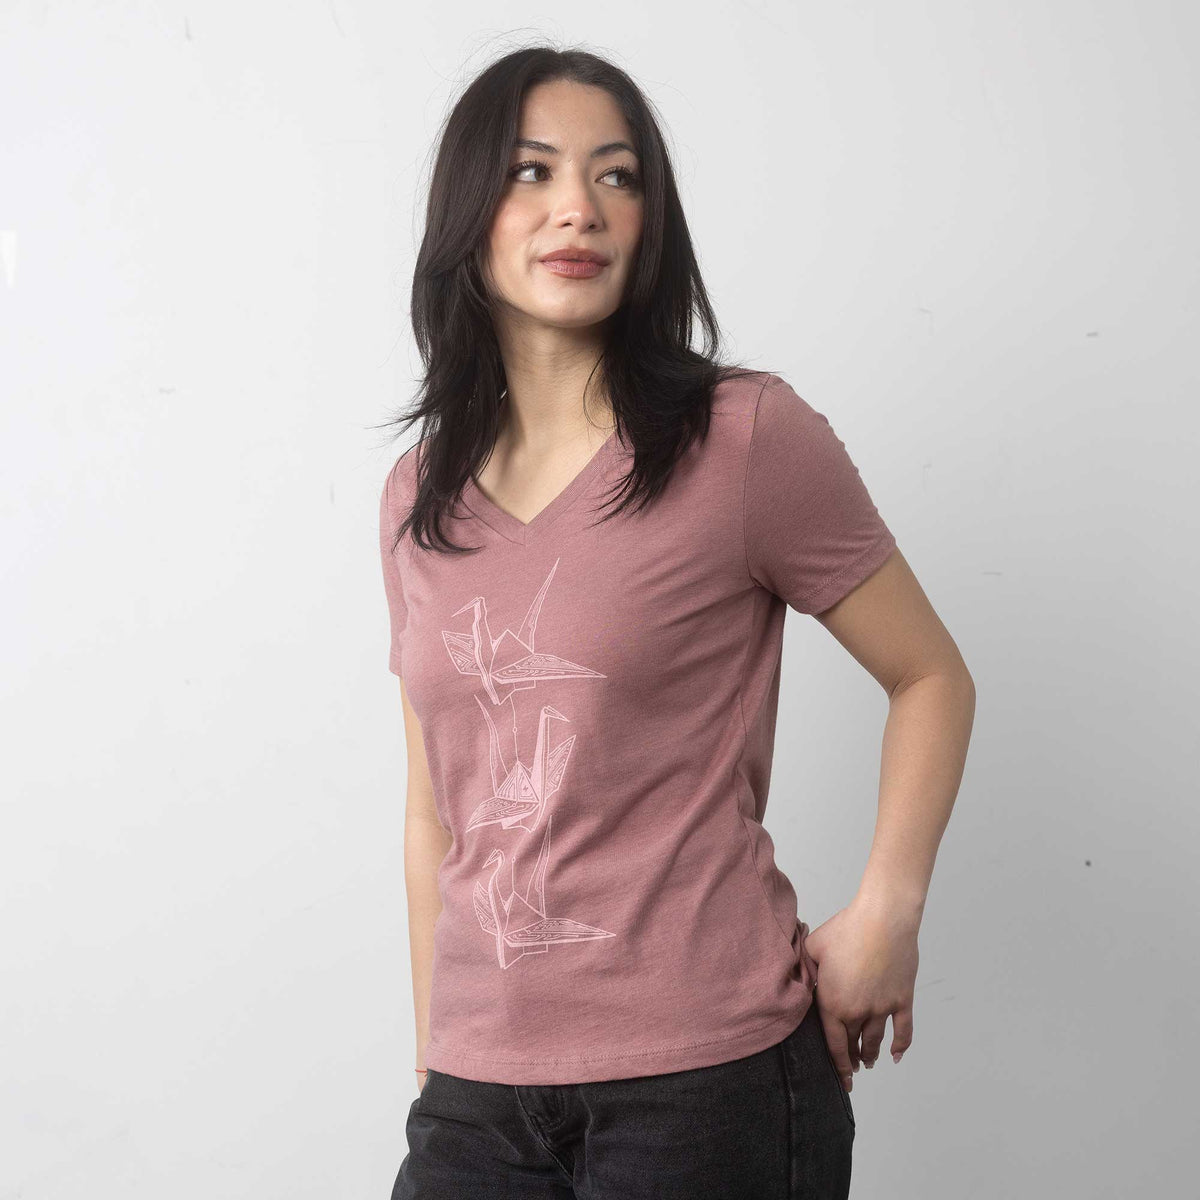 Tech-gami Womens T-shirt by STORY SPARK